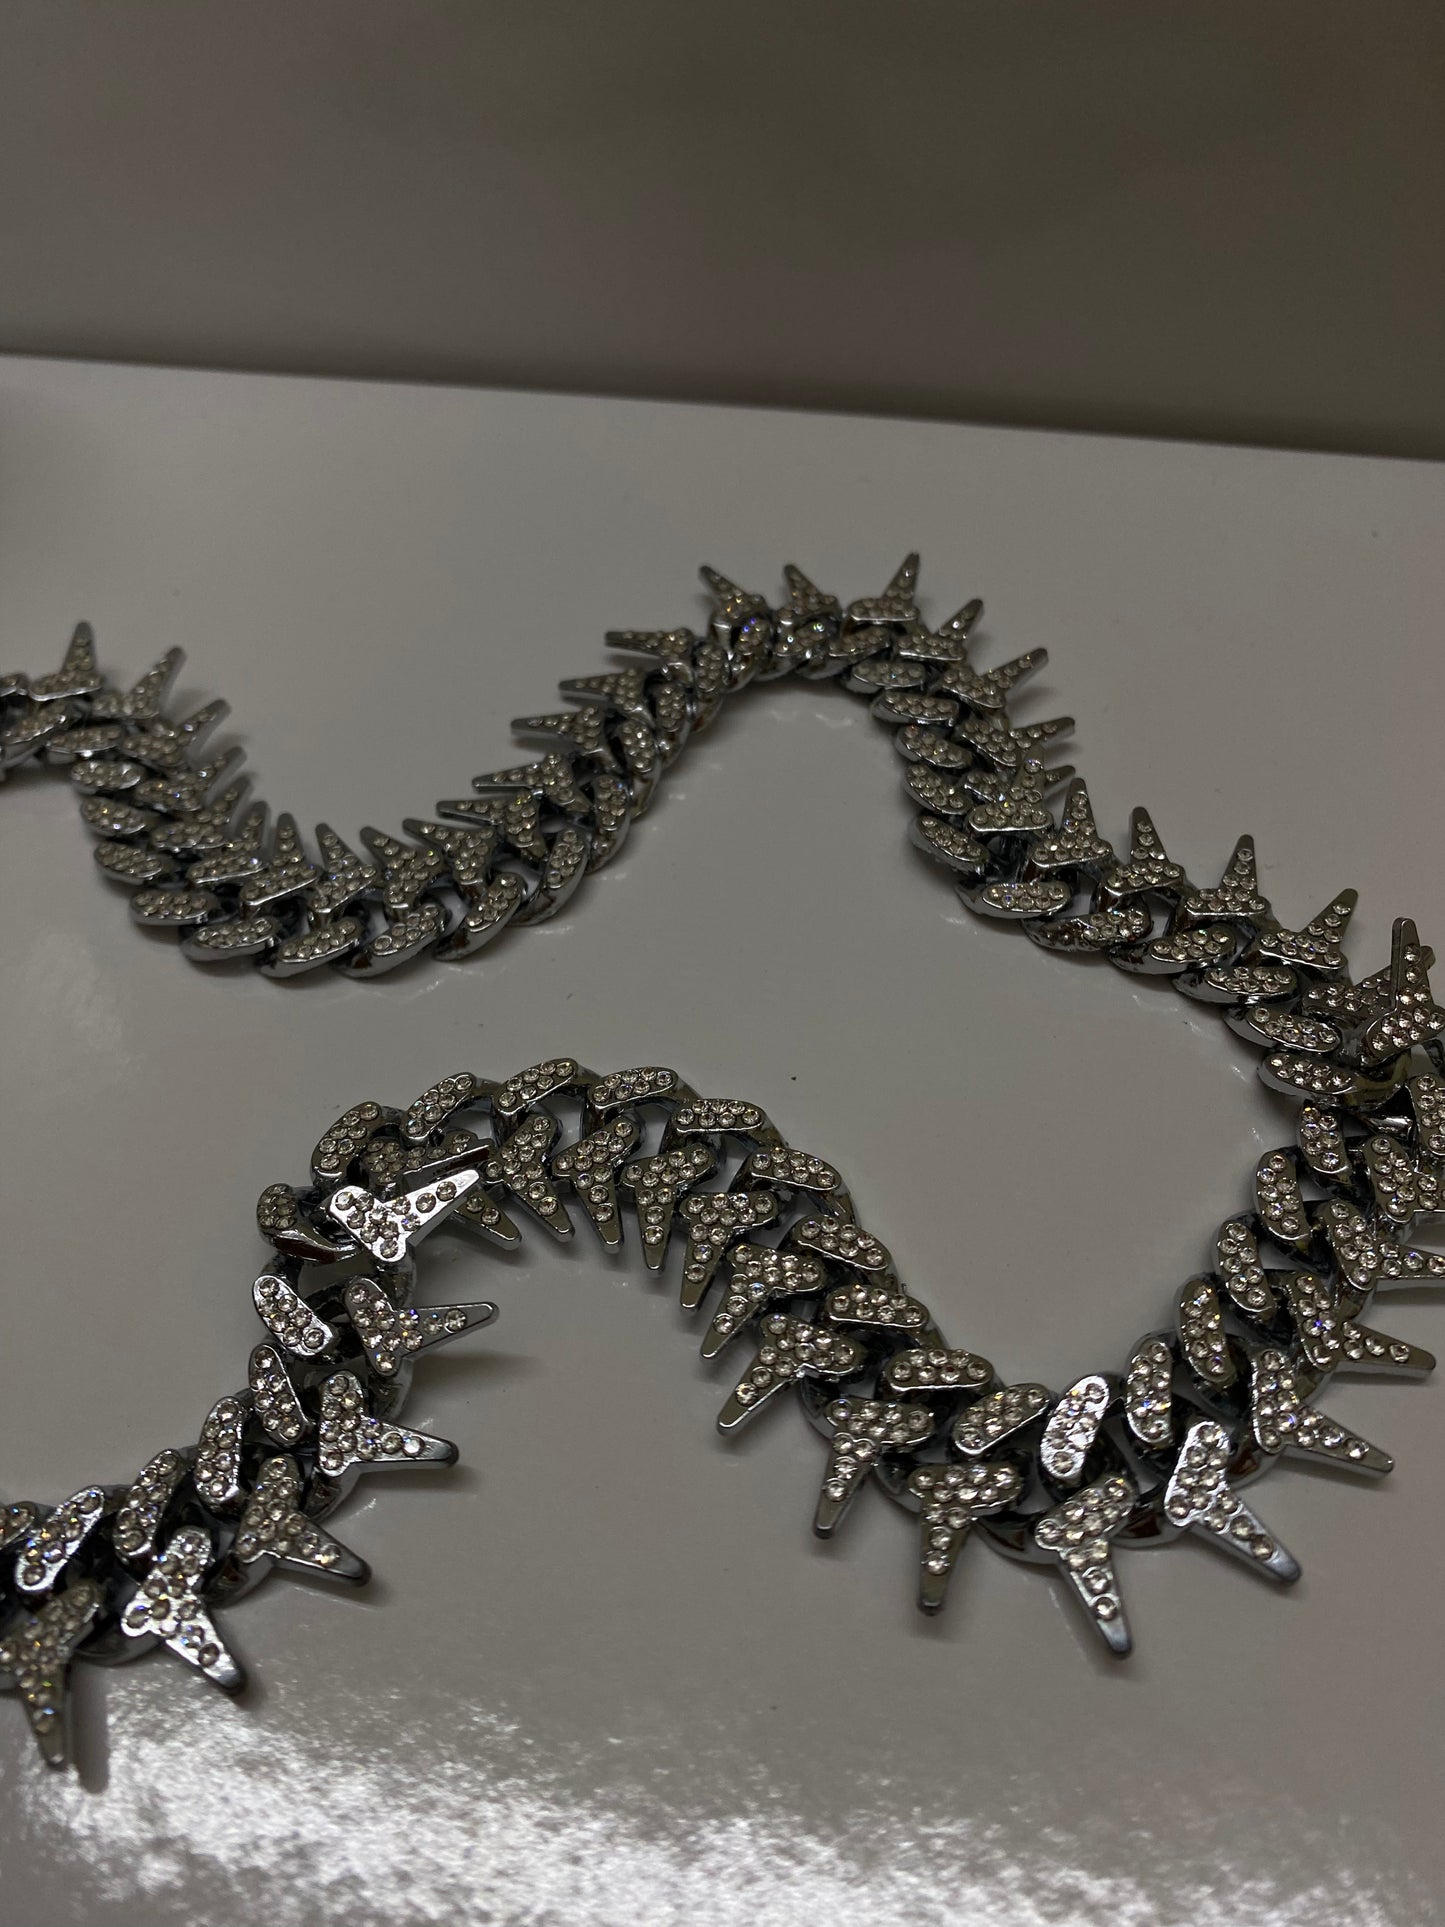 Icy spiky chain